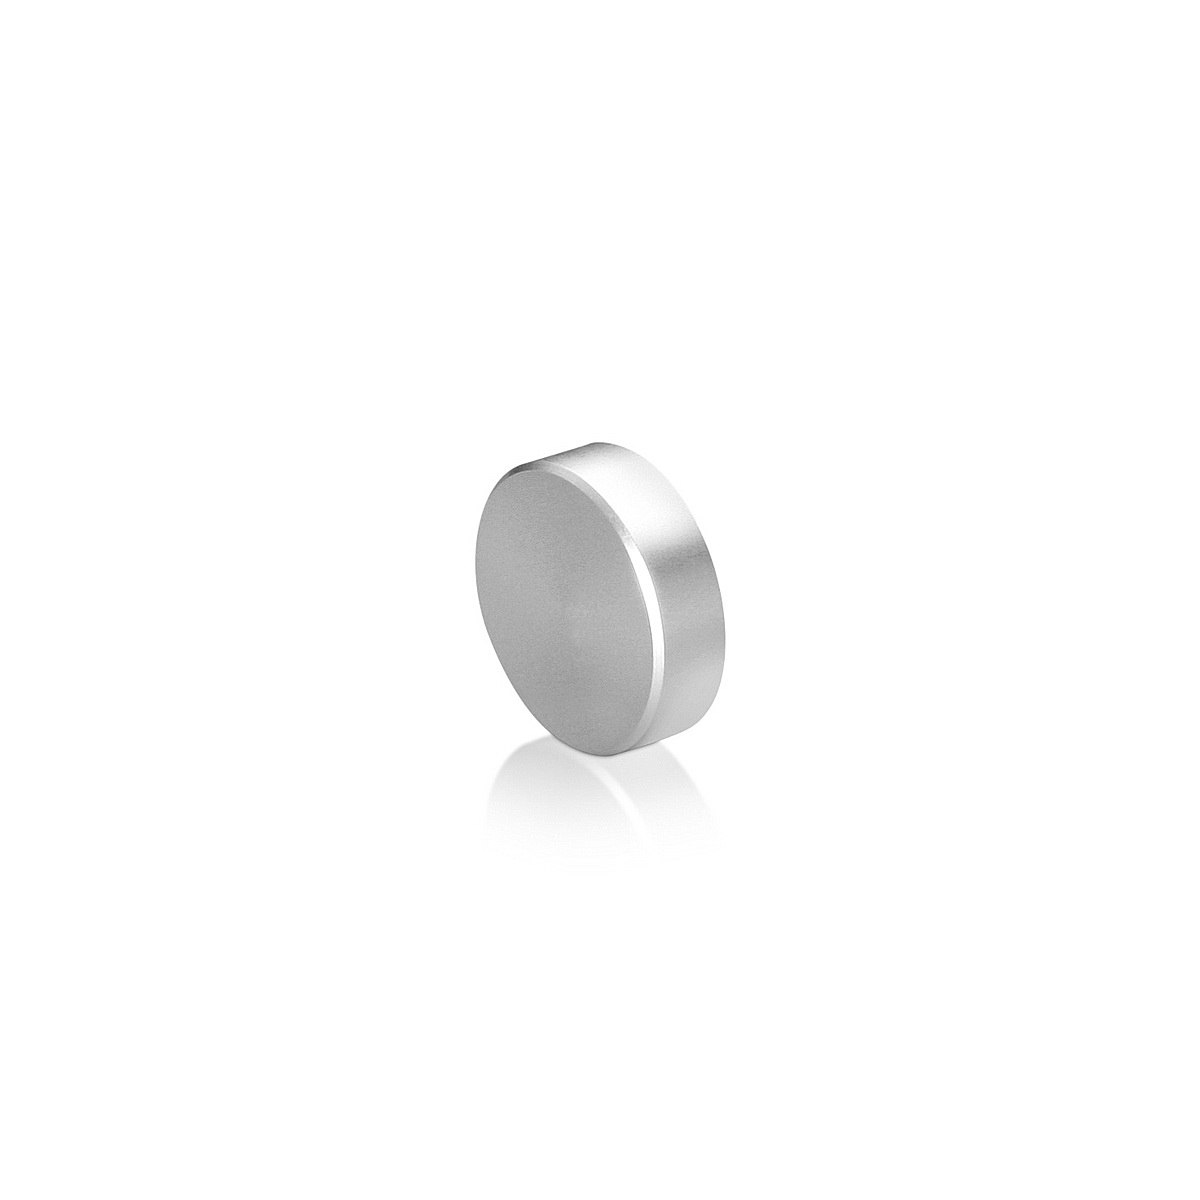 1/4-20 Threaded Caps Diameter: 7/8'', Height: 1/4'', Clear Anodized Aluminum [Required Material Hole Size: 5/16'']